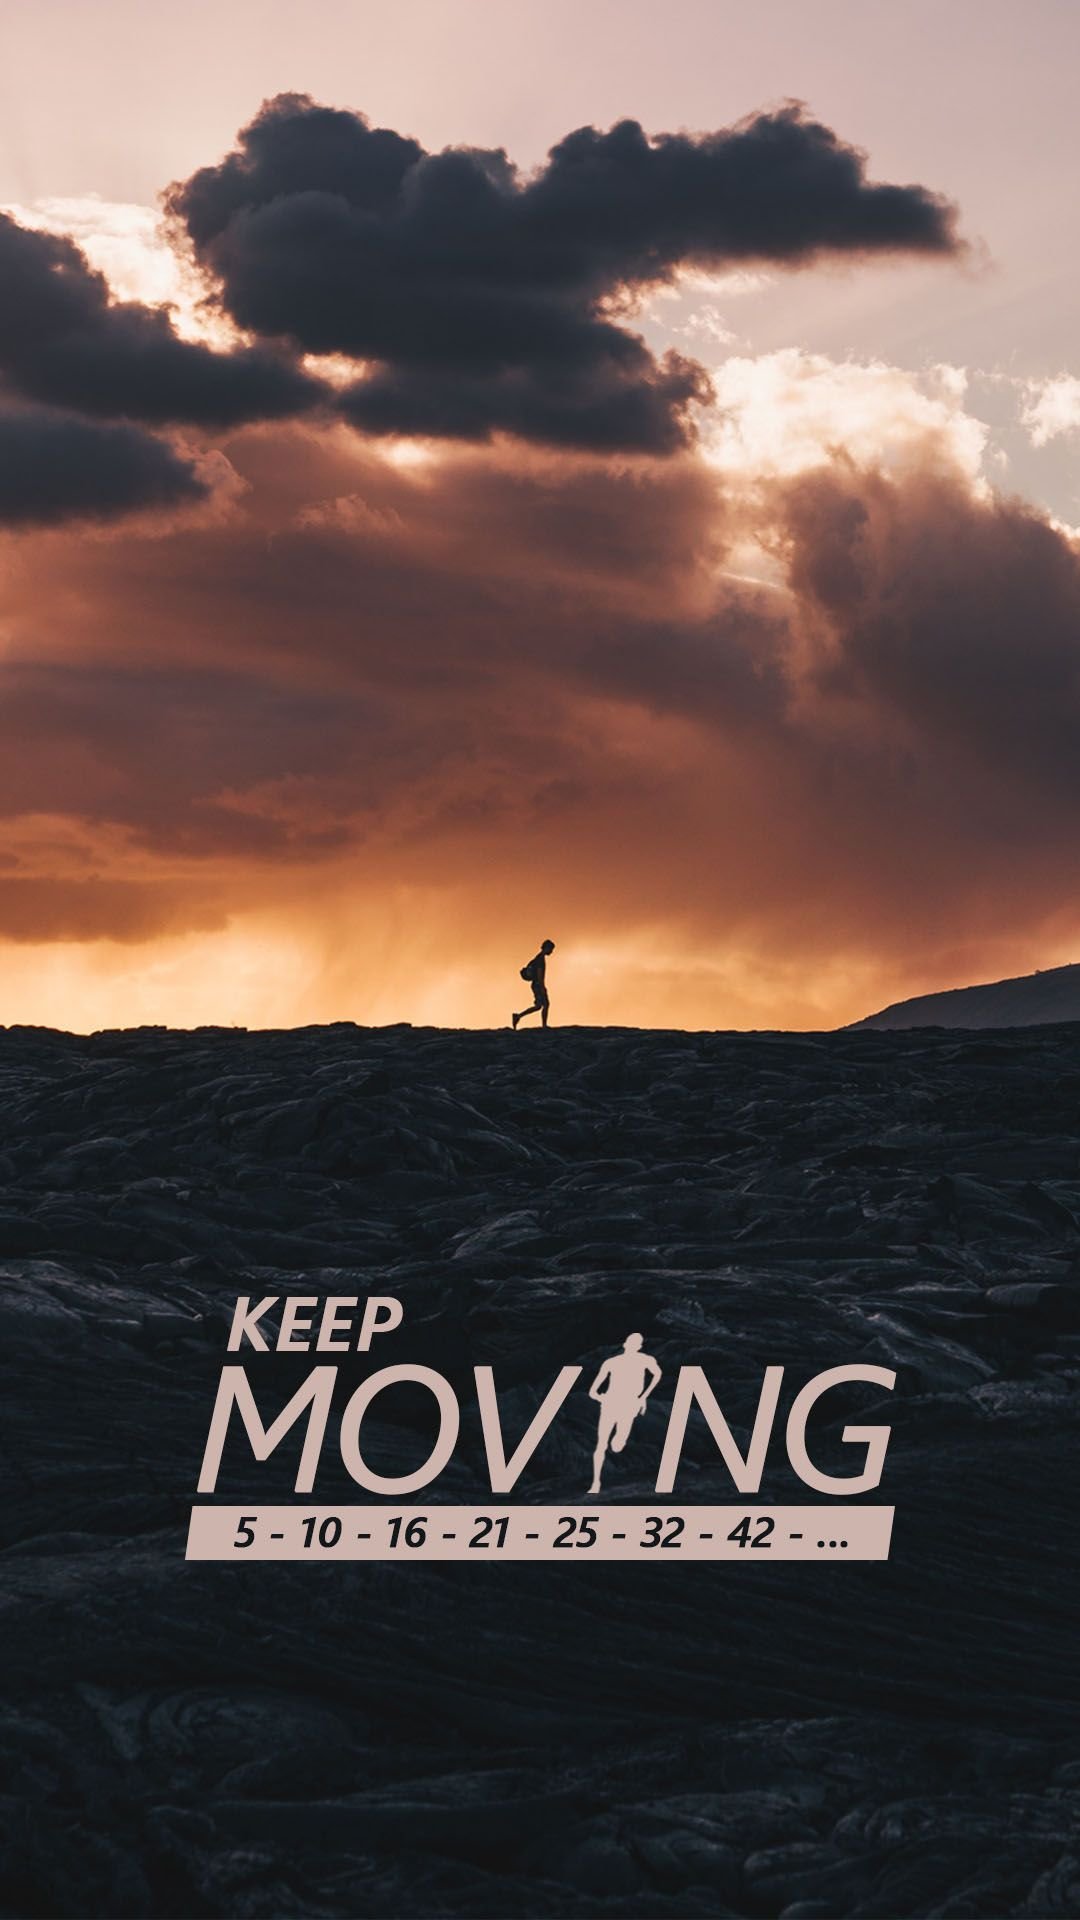 Keep moving forward Images - Search Images on Everypixel